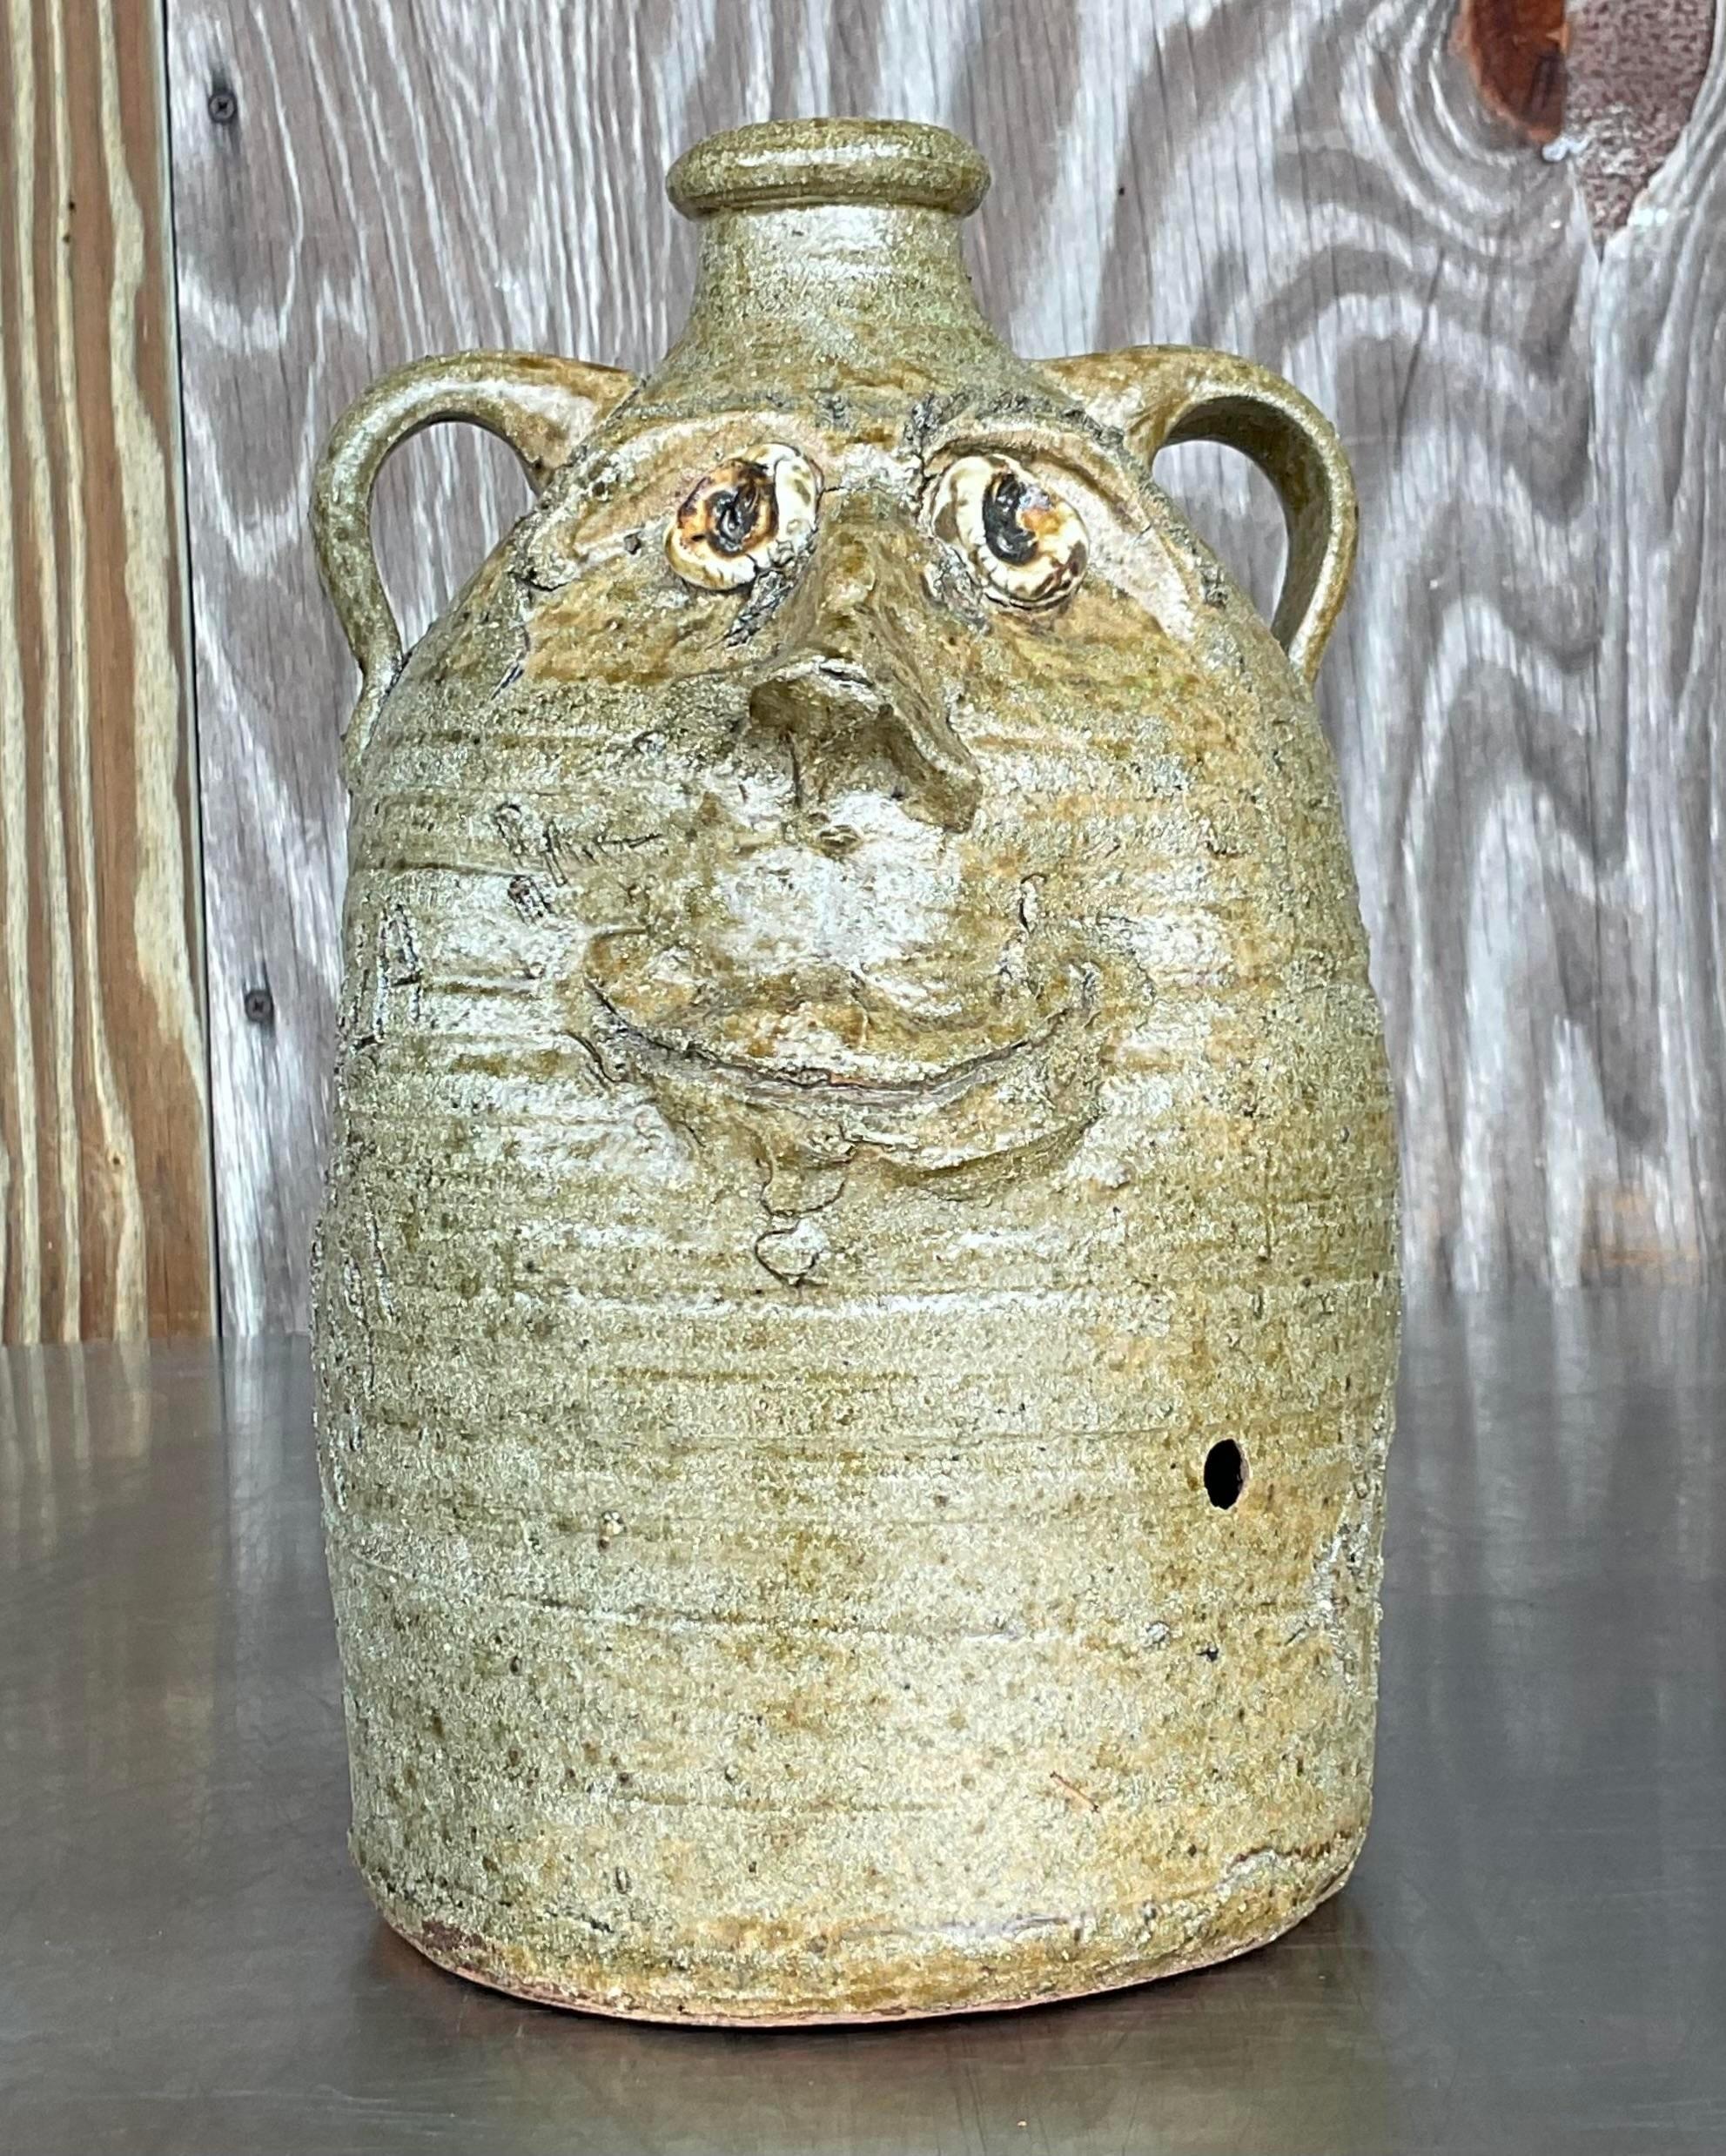 Elevate your décor with this unique Vintage Boho Signed Studio Pottery Two-Faced Jug.
Handcrafted by a skilled artist, its unique design reflects the beauty of the natural world, adding a touch of rustic elegance to any space. With its timeless